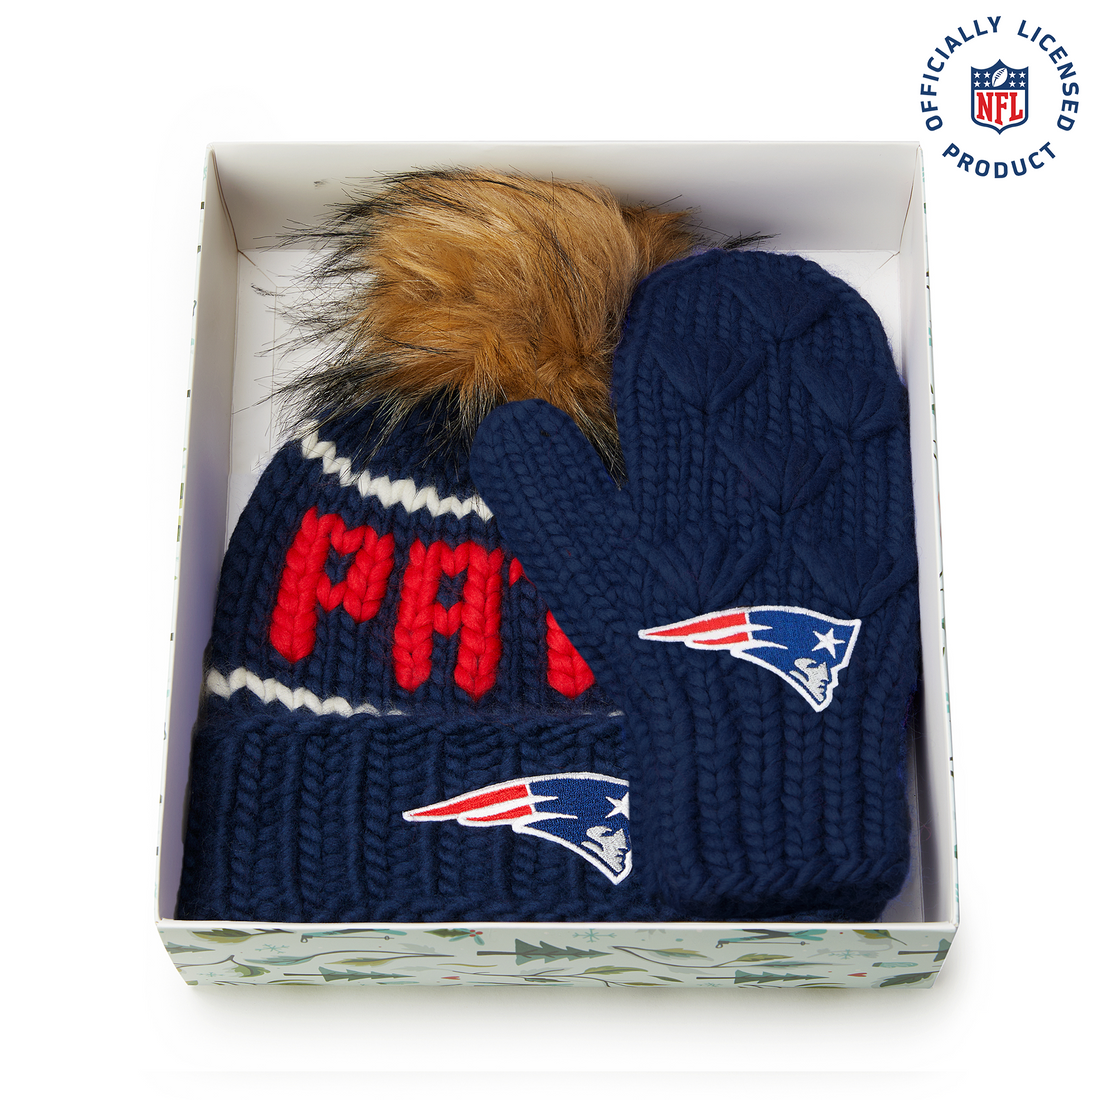 The Pats NFL Beanie and Mitten Gift Set